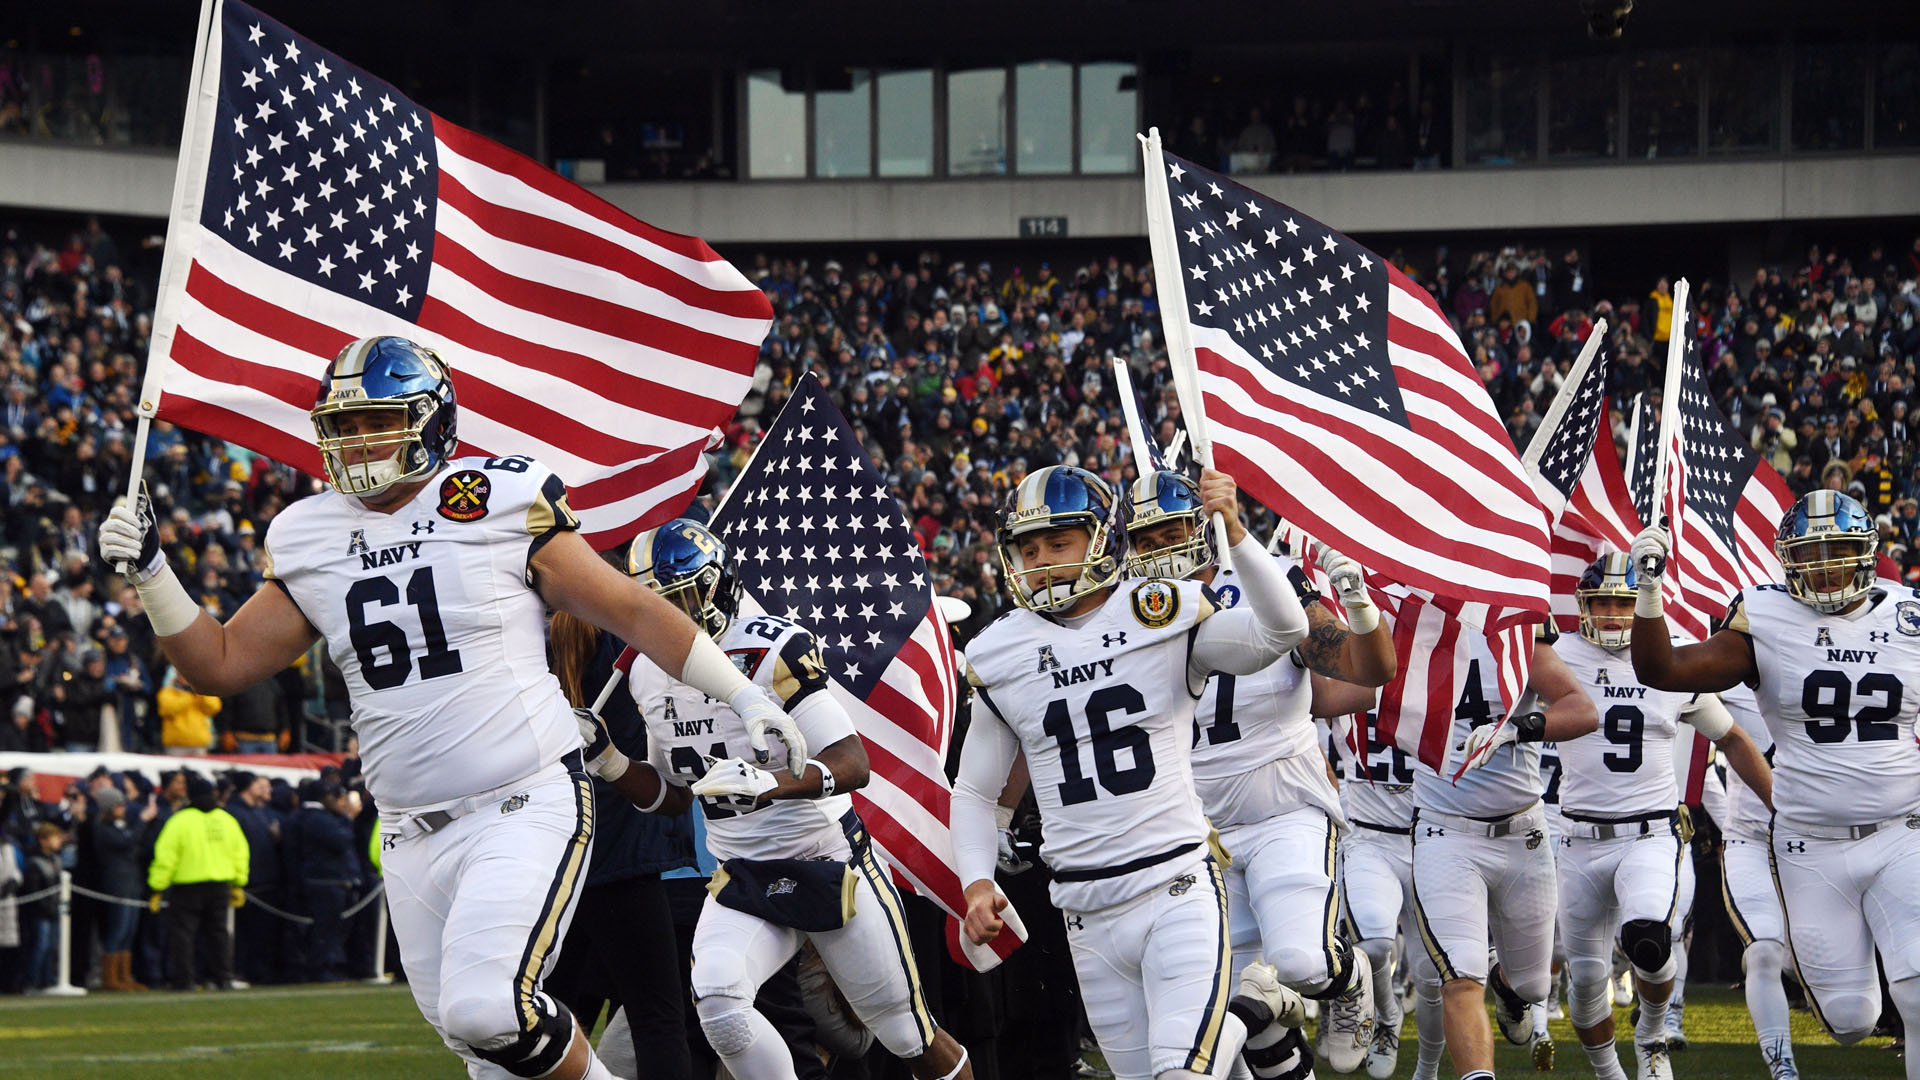 Navy's defense extends past the football field for Saturday's matchup with Army NCAA Football